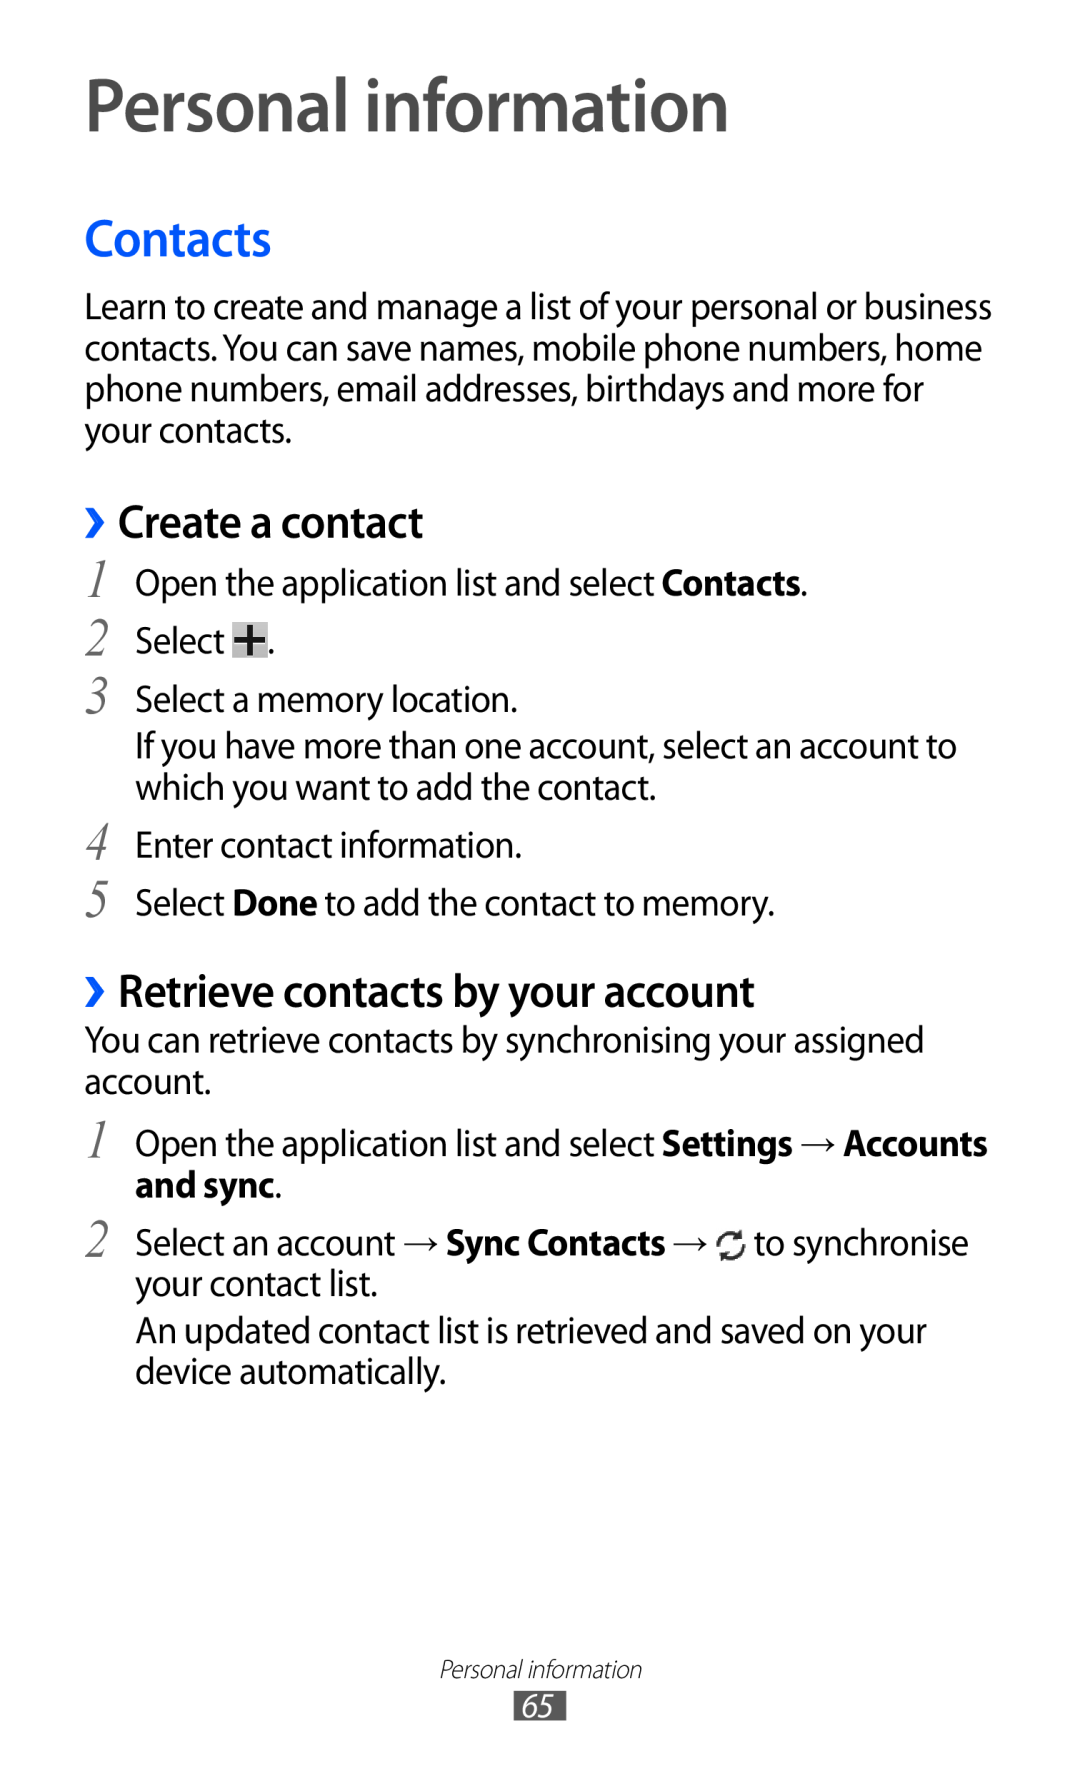 Samsung GT-P7310FKASER Personal information, Contacts, ››Create a contact, ››Retrieve contacts by your account, and sync 